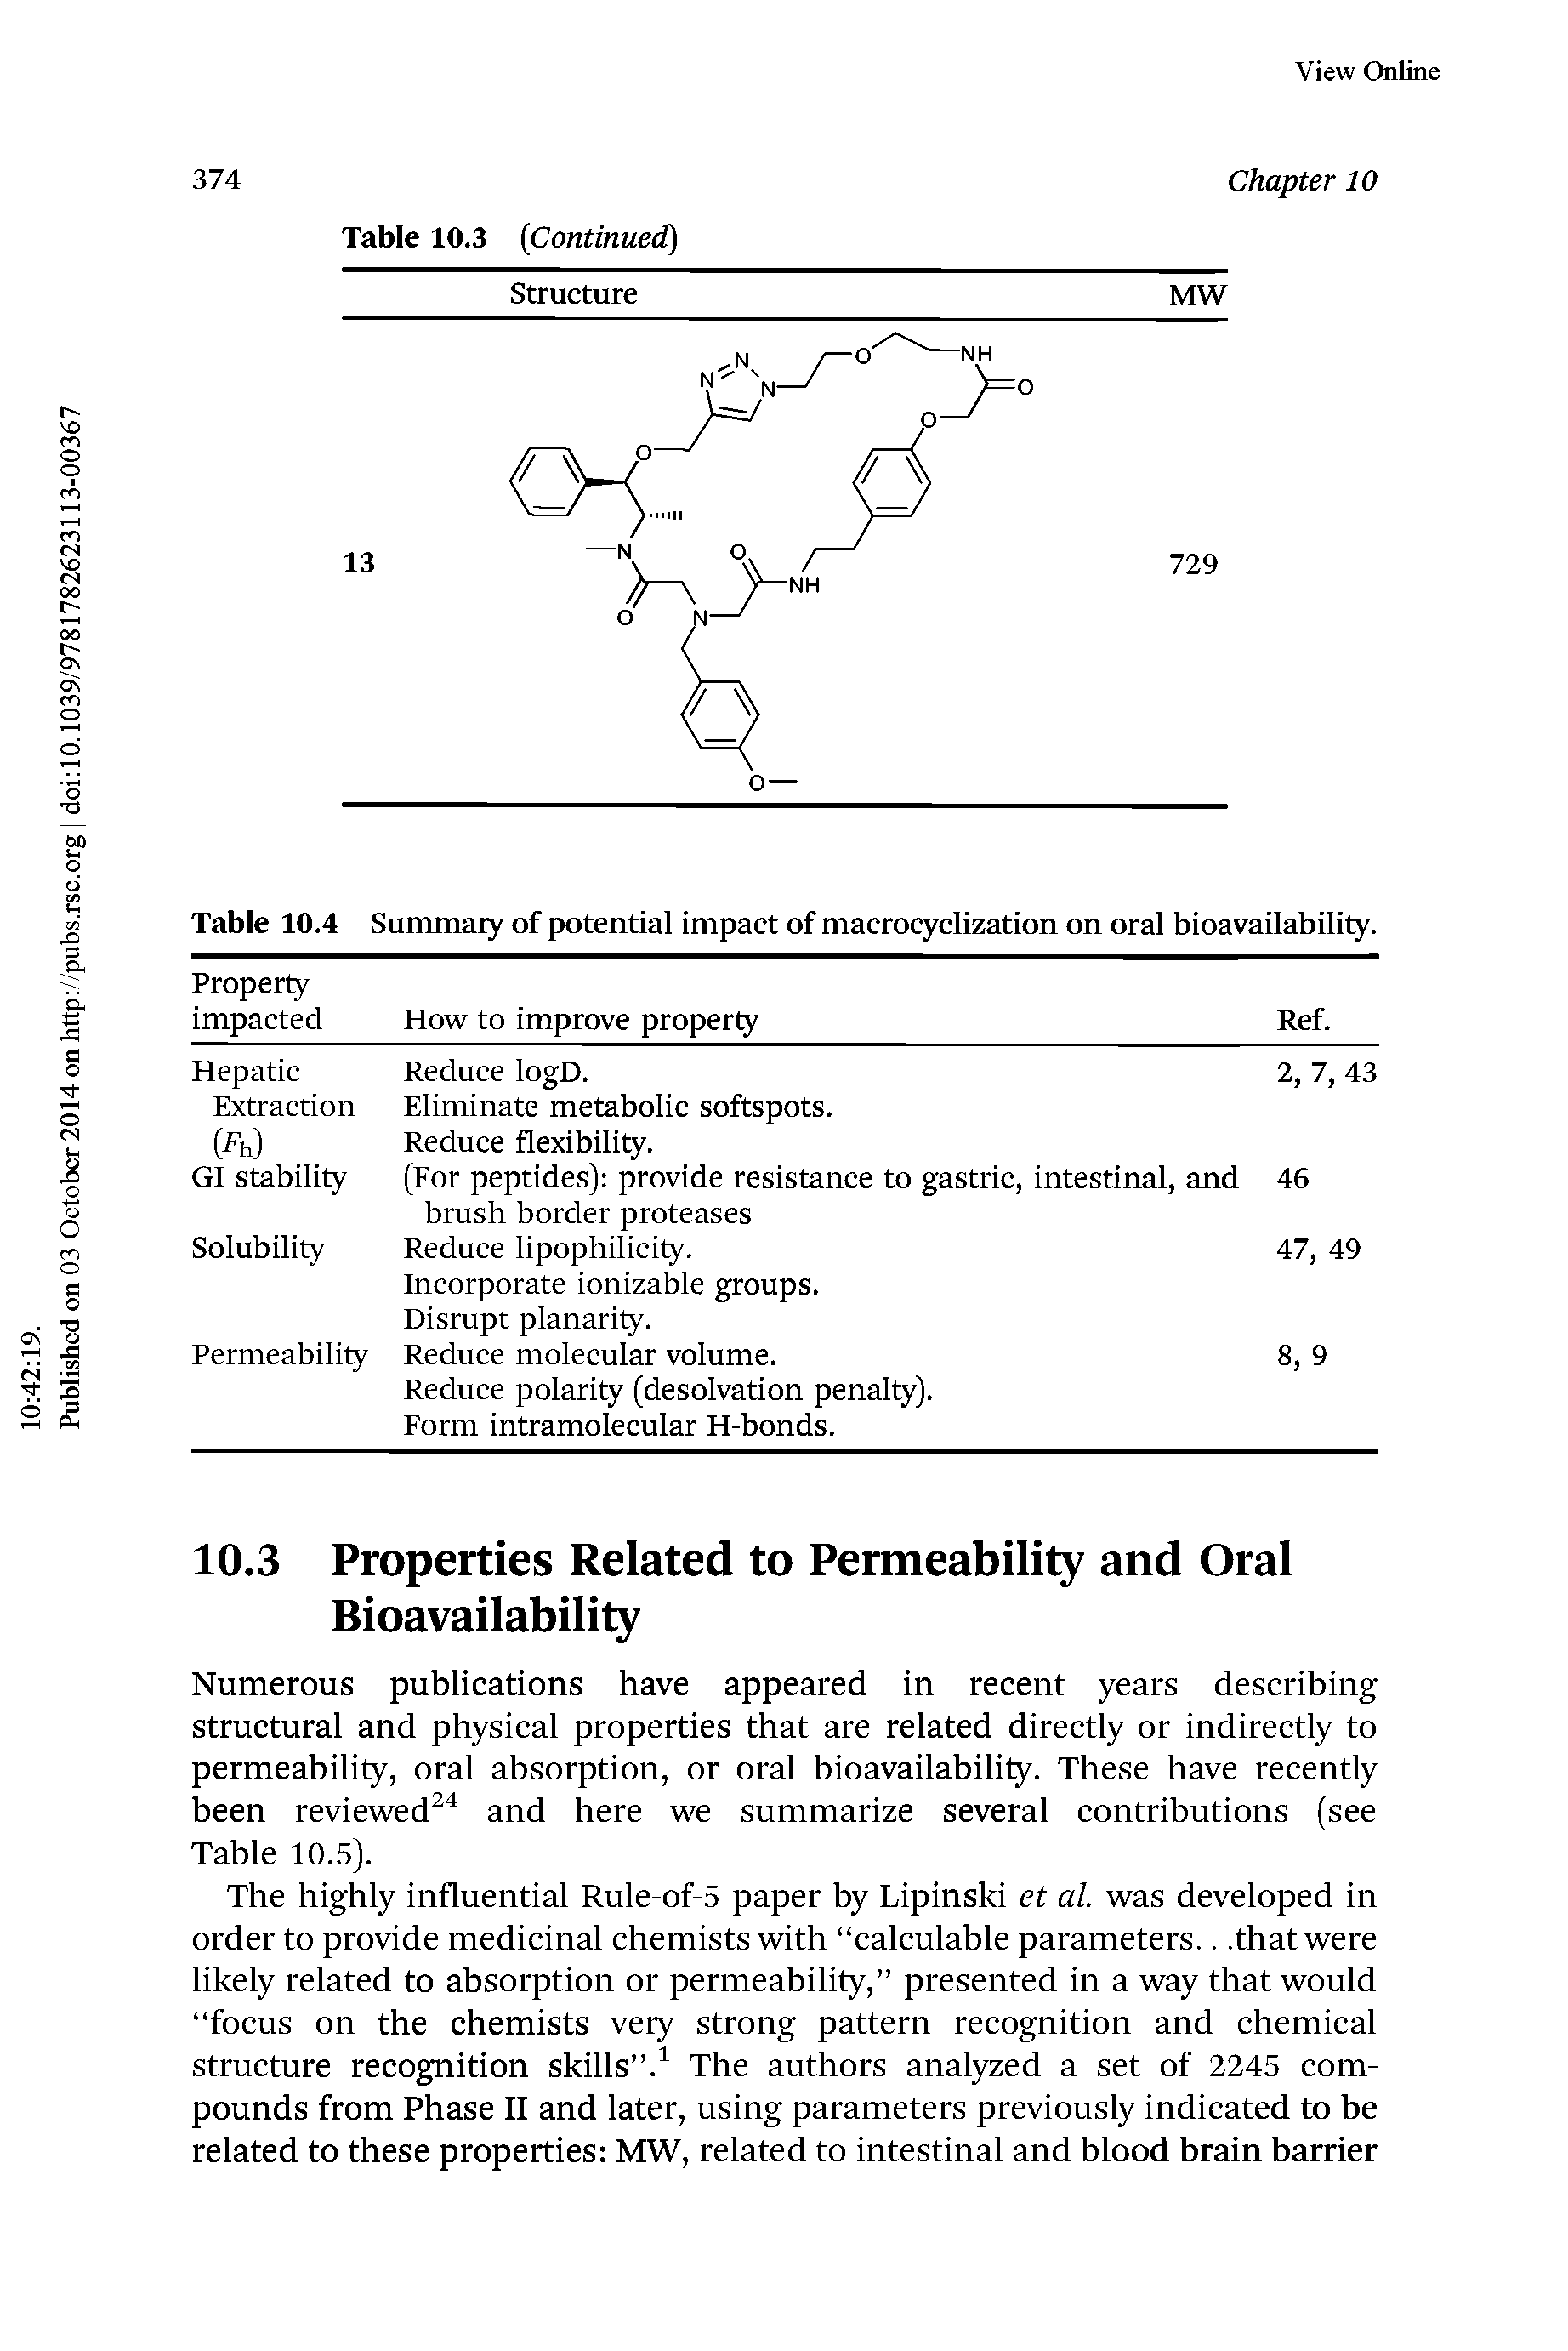 Table 10.4 Summary of potential impact of macrocyclization on oral bioavailability.